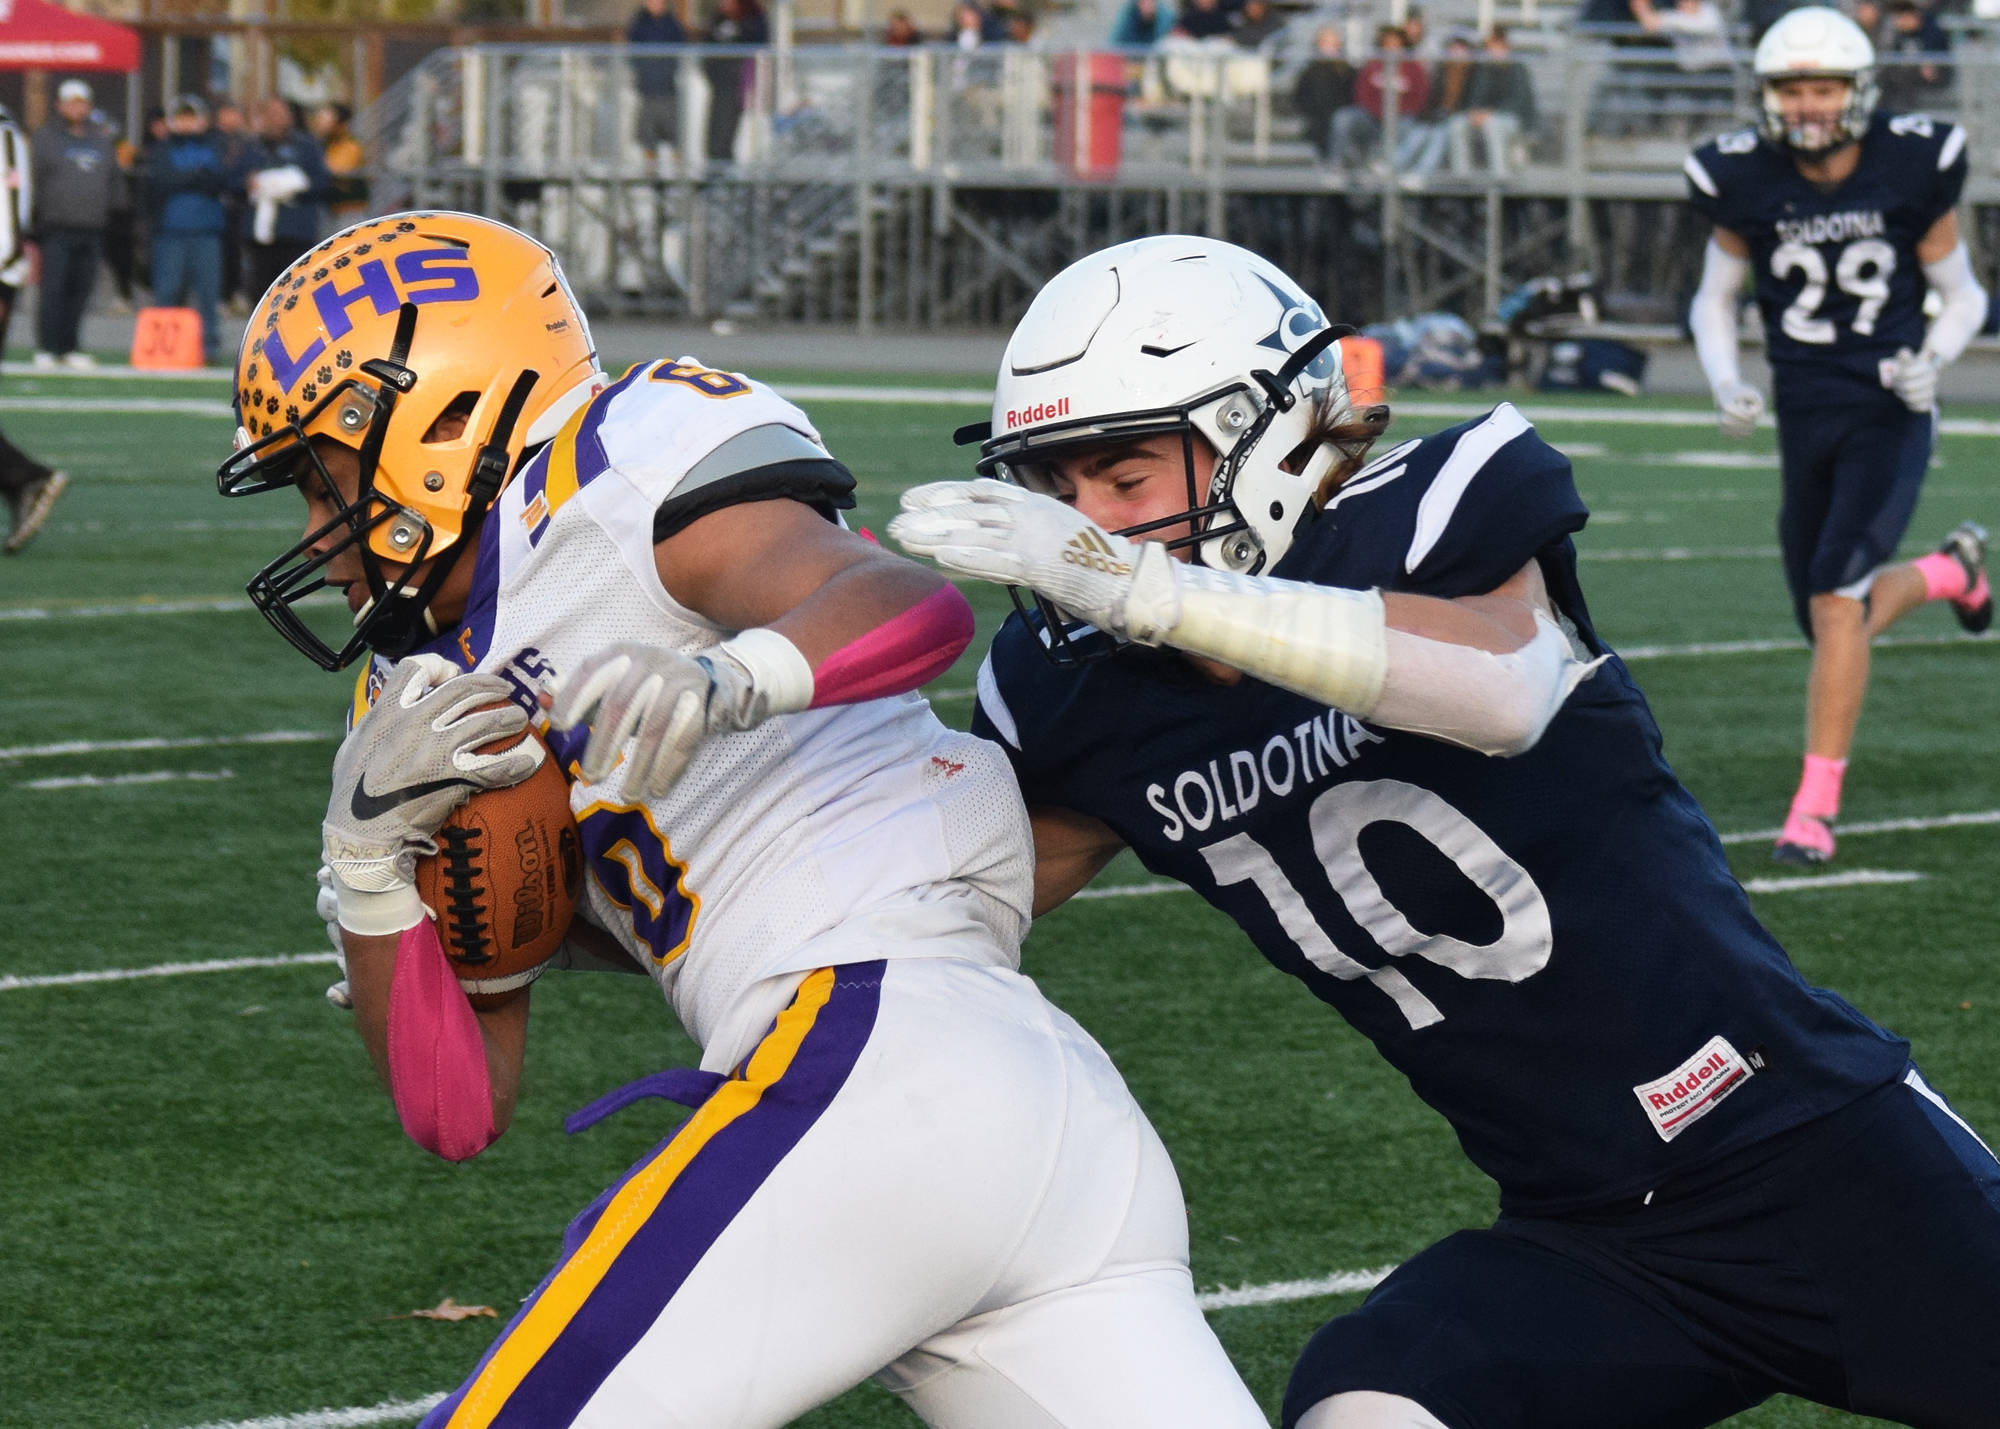 Soldotna’s Zach Hanson gets his hands on Lathrop’s Tyriq Luke on a reception Saturday, Oct. 19, 2019, at the Div. II state football championship at Anchorage Football Stadium in Anchorage, Alaska. (Photo by Joey Klecka/Peninsula Clarion)